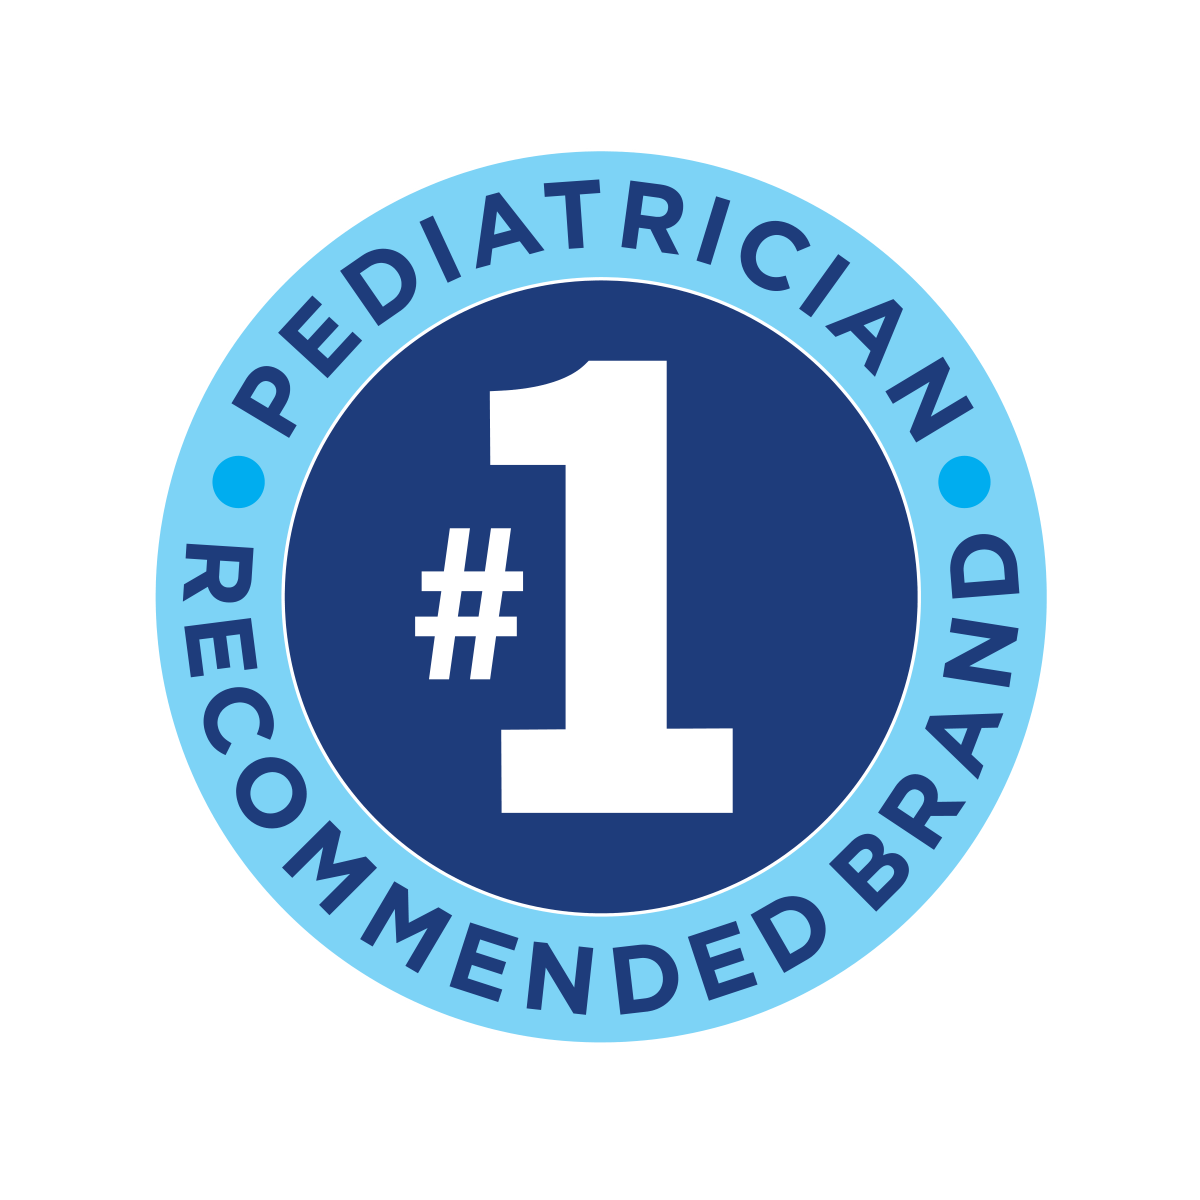 #1 Pediatrician Recommended Brand icon